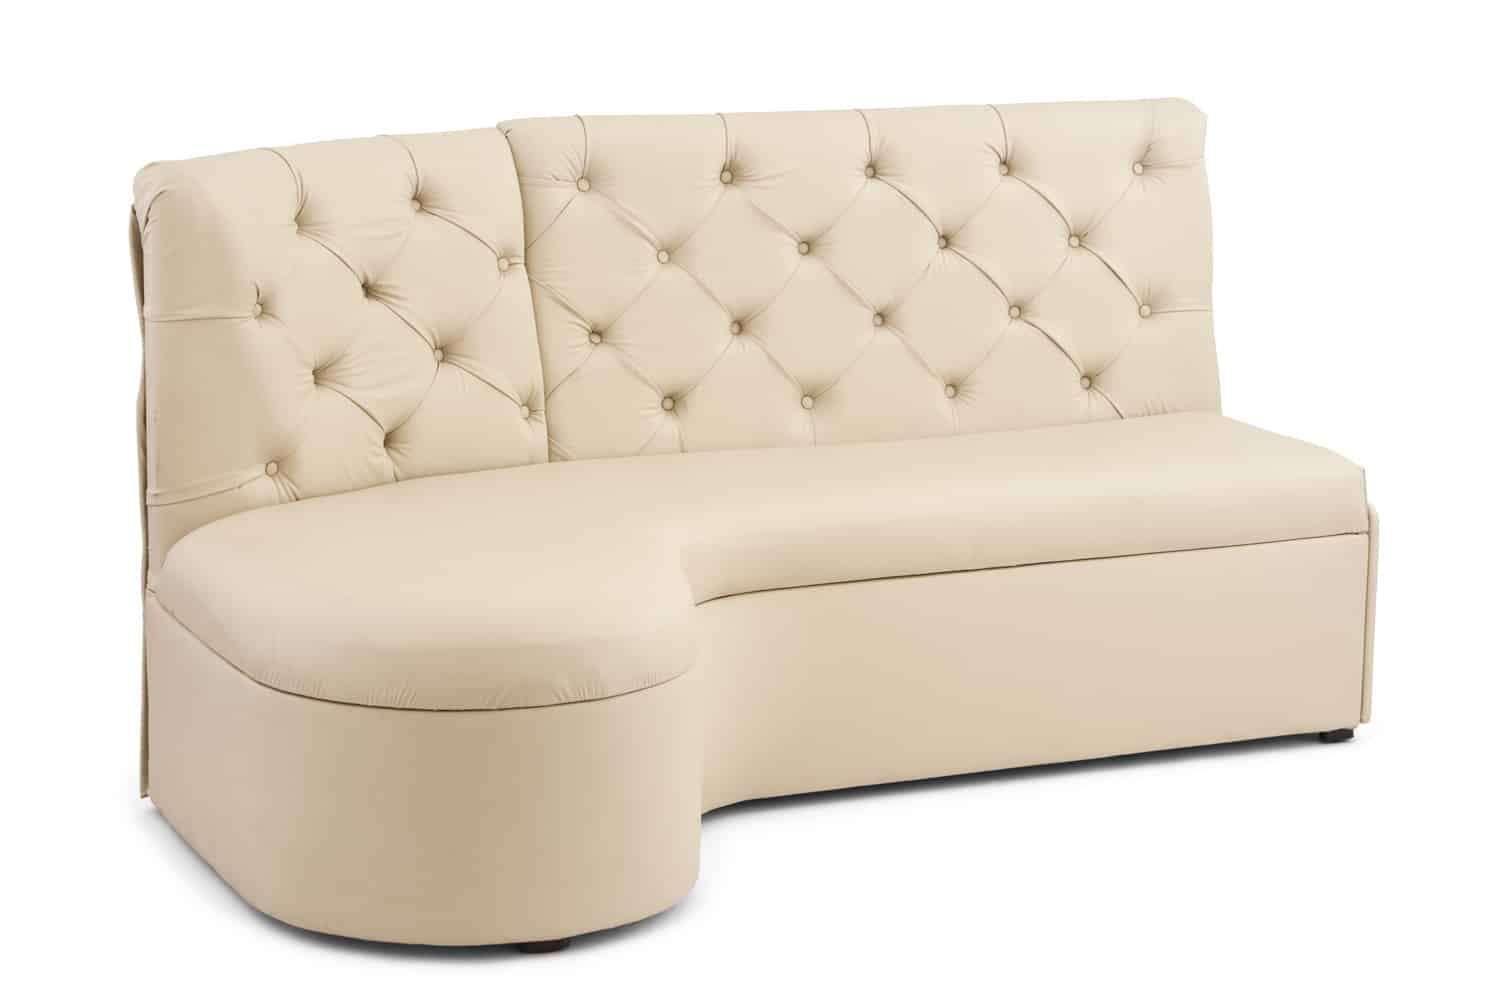 Cushioned Leather Sofa,Restaurant Booth,Furniture, Decoration,Isolated on White with Clipping Path